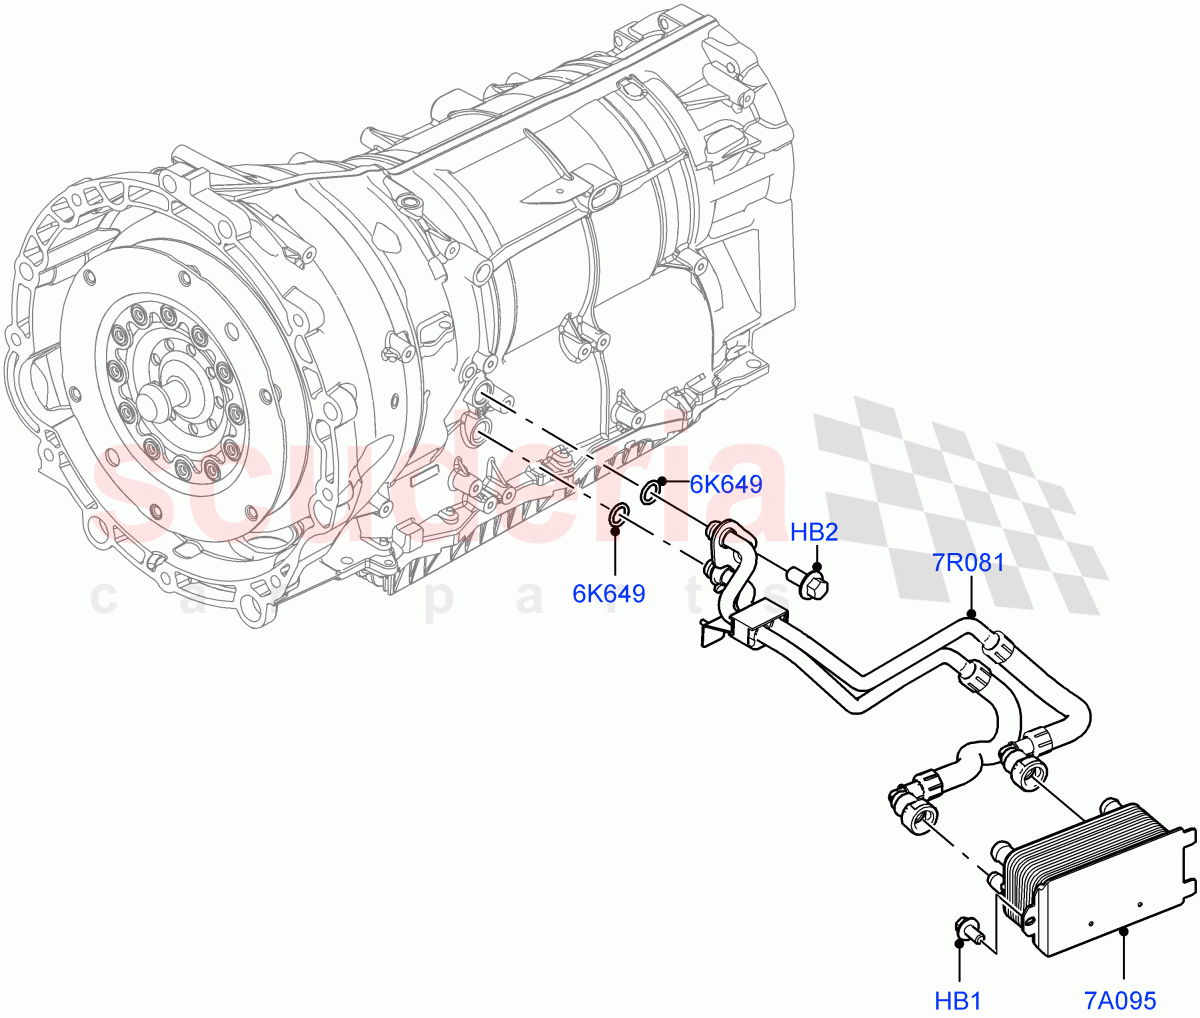 Transmission Cooling Systems(3.0L AJ20P6 Petrol High,8 Speed Auto Trans ZF 8HP76,3.0L AJ20D6 Diesel High)((V)FROMKA000001) of Land Rover Land Rover Range Rover (2012-2021) [5.0 OHC SGDI SC V8 Petrol]